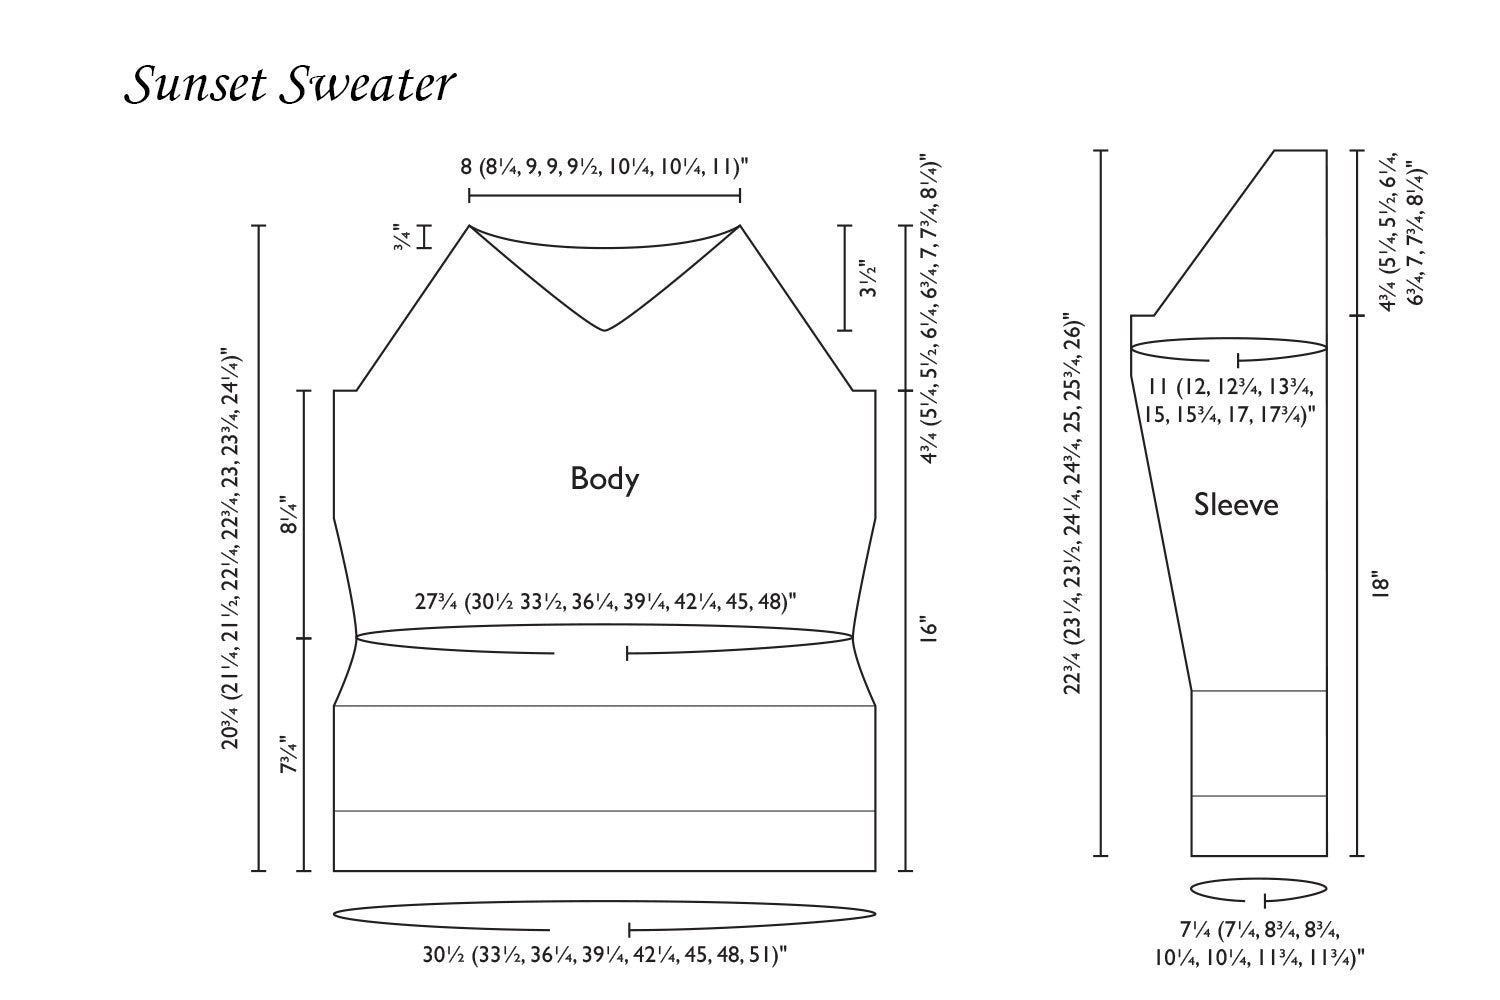 Detailed schematic line drawing with dimensions for Sunset Sweater